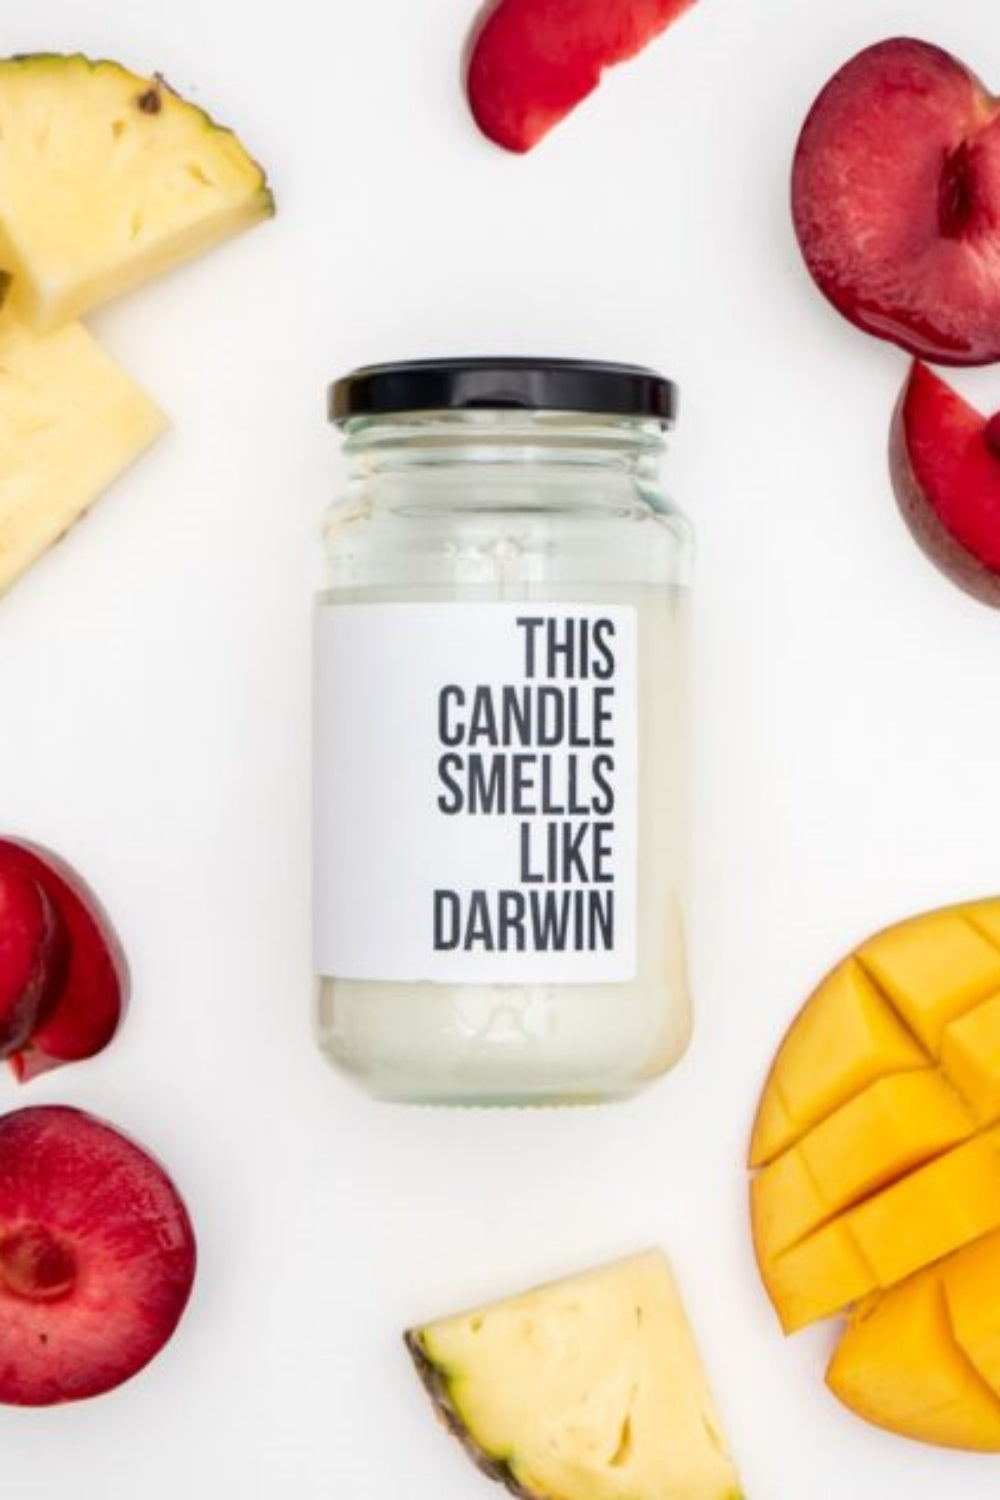 THIS CANDLE SMELLS LIKE DARWIN